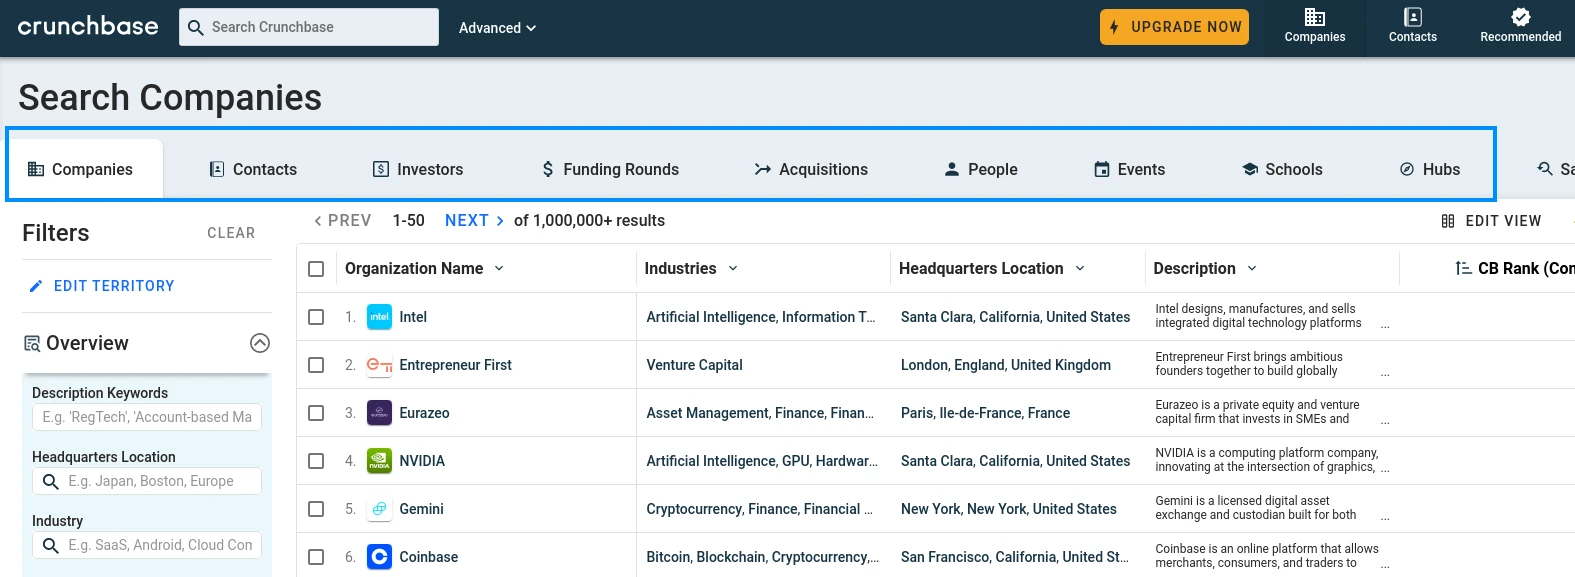 crunchbase discovery page